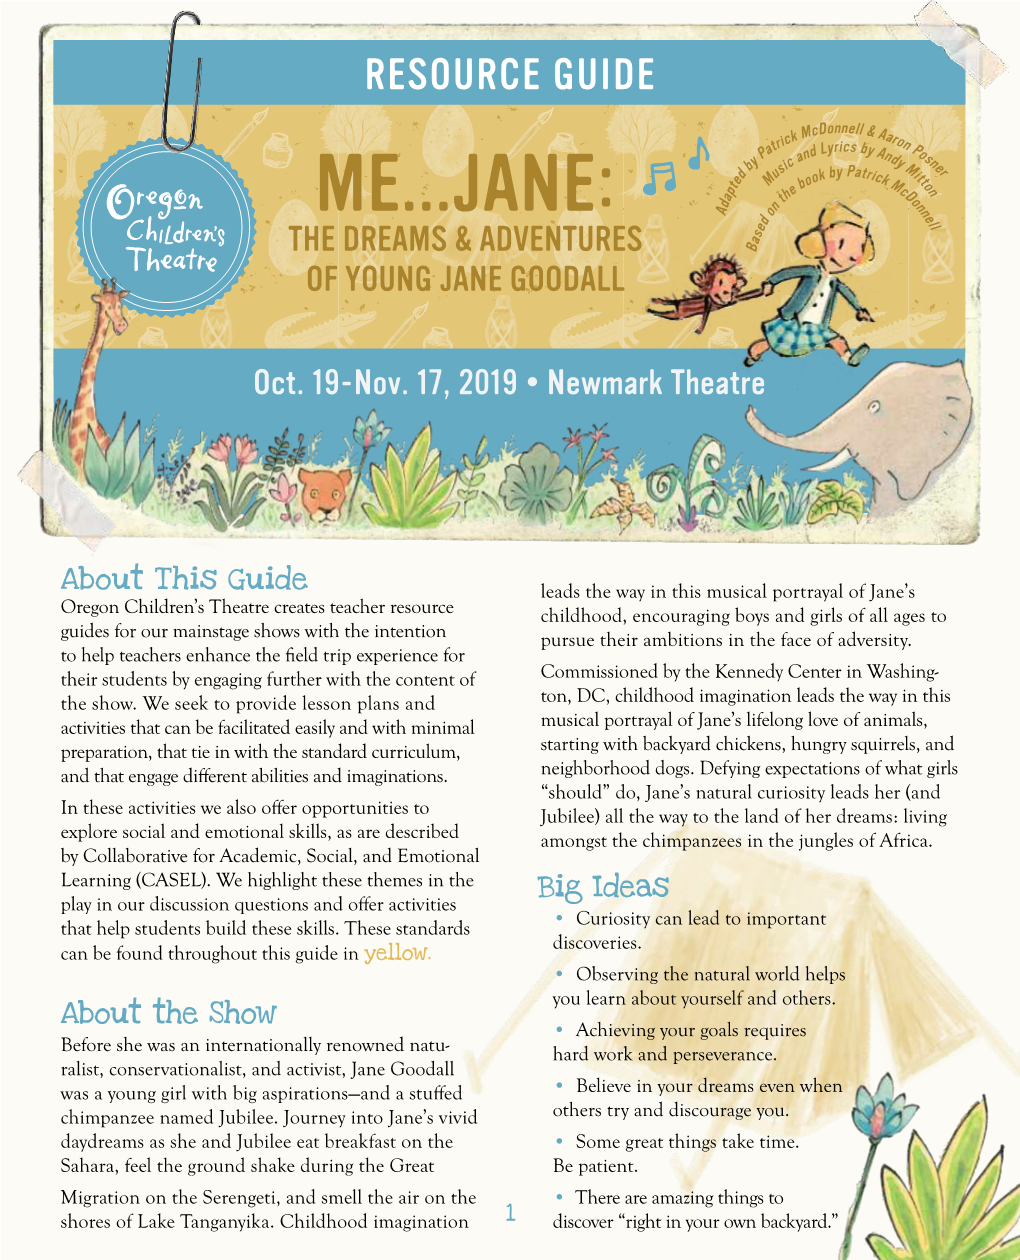 ME...JANE: D Ll E S a B the DREAMS & ADVENTURES of YOUNG JANE GOODALL